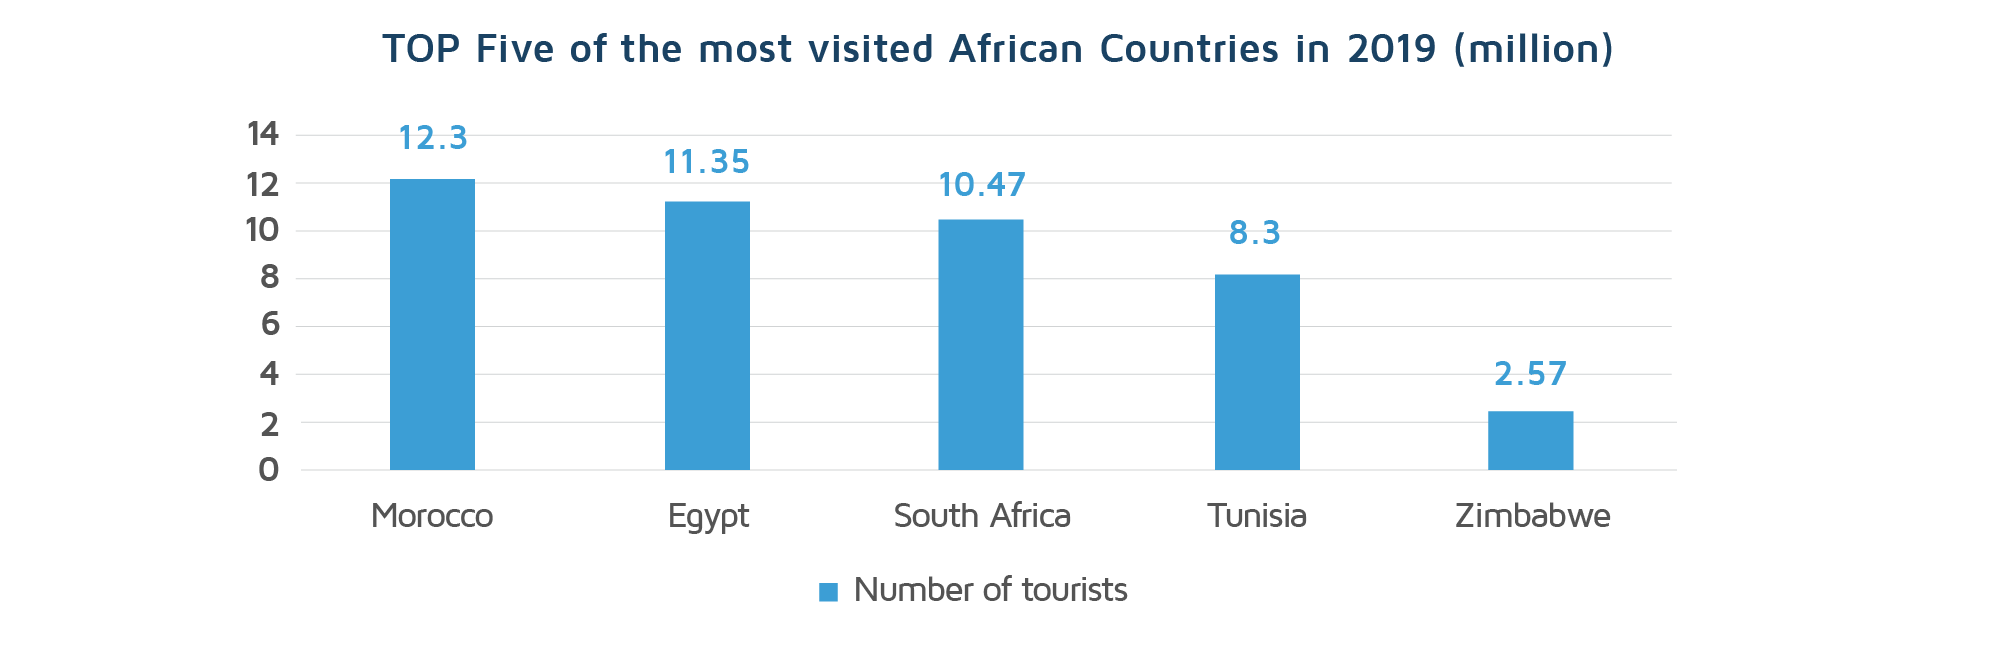 Africa_TOP Five of the most visited African Countries in 2019 (million)